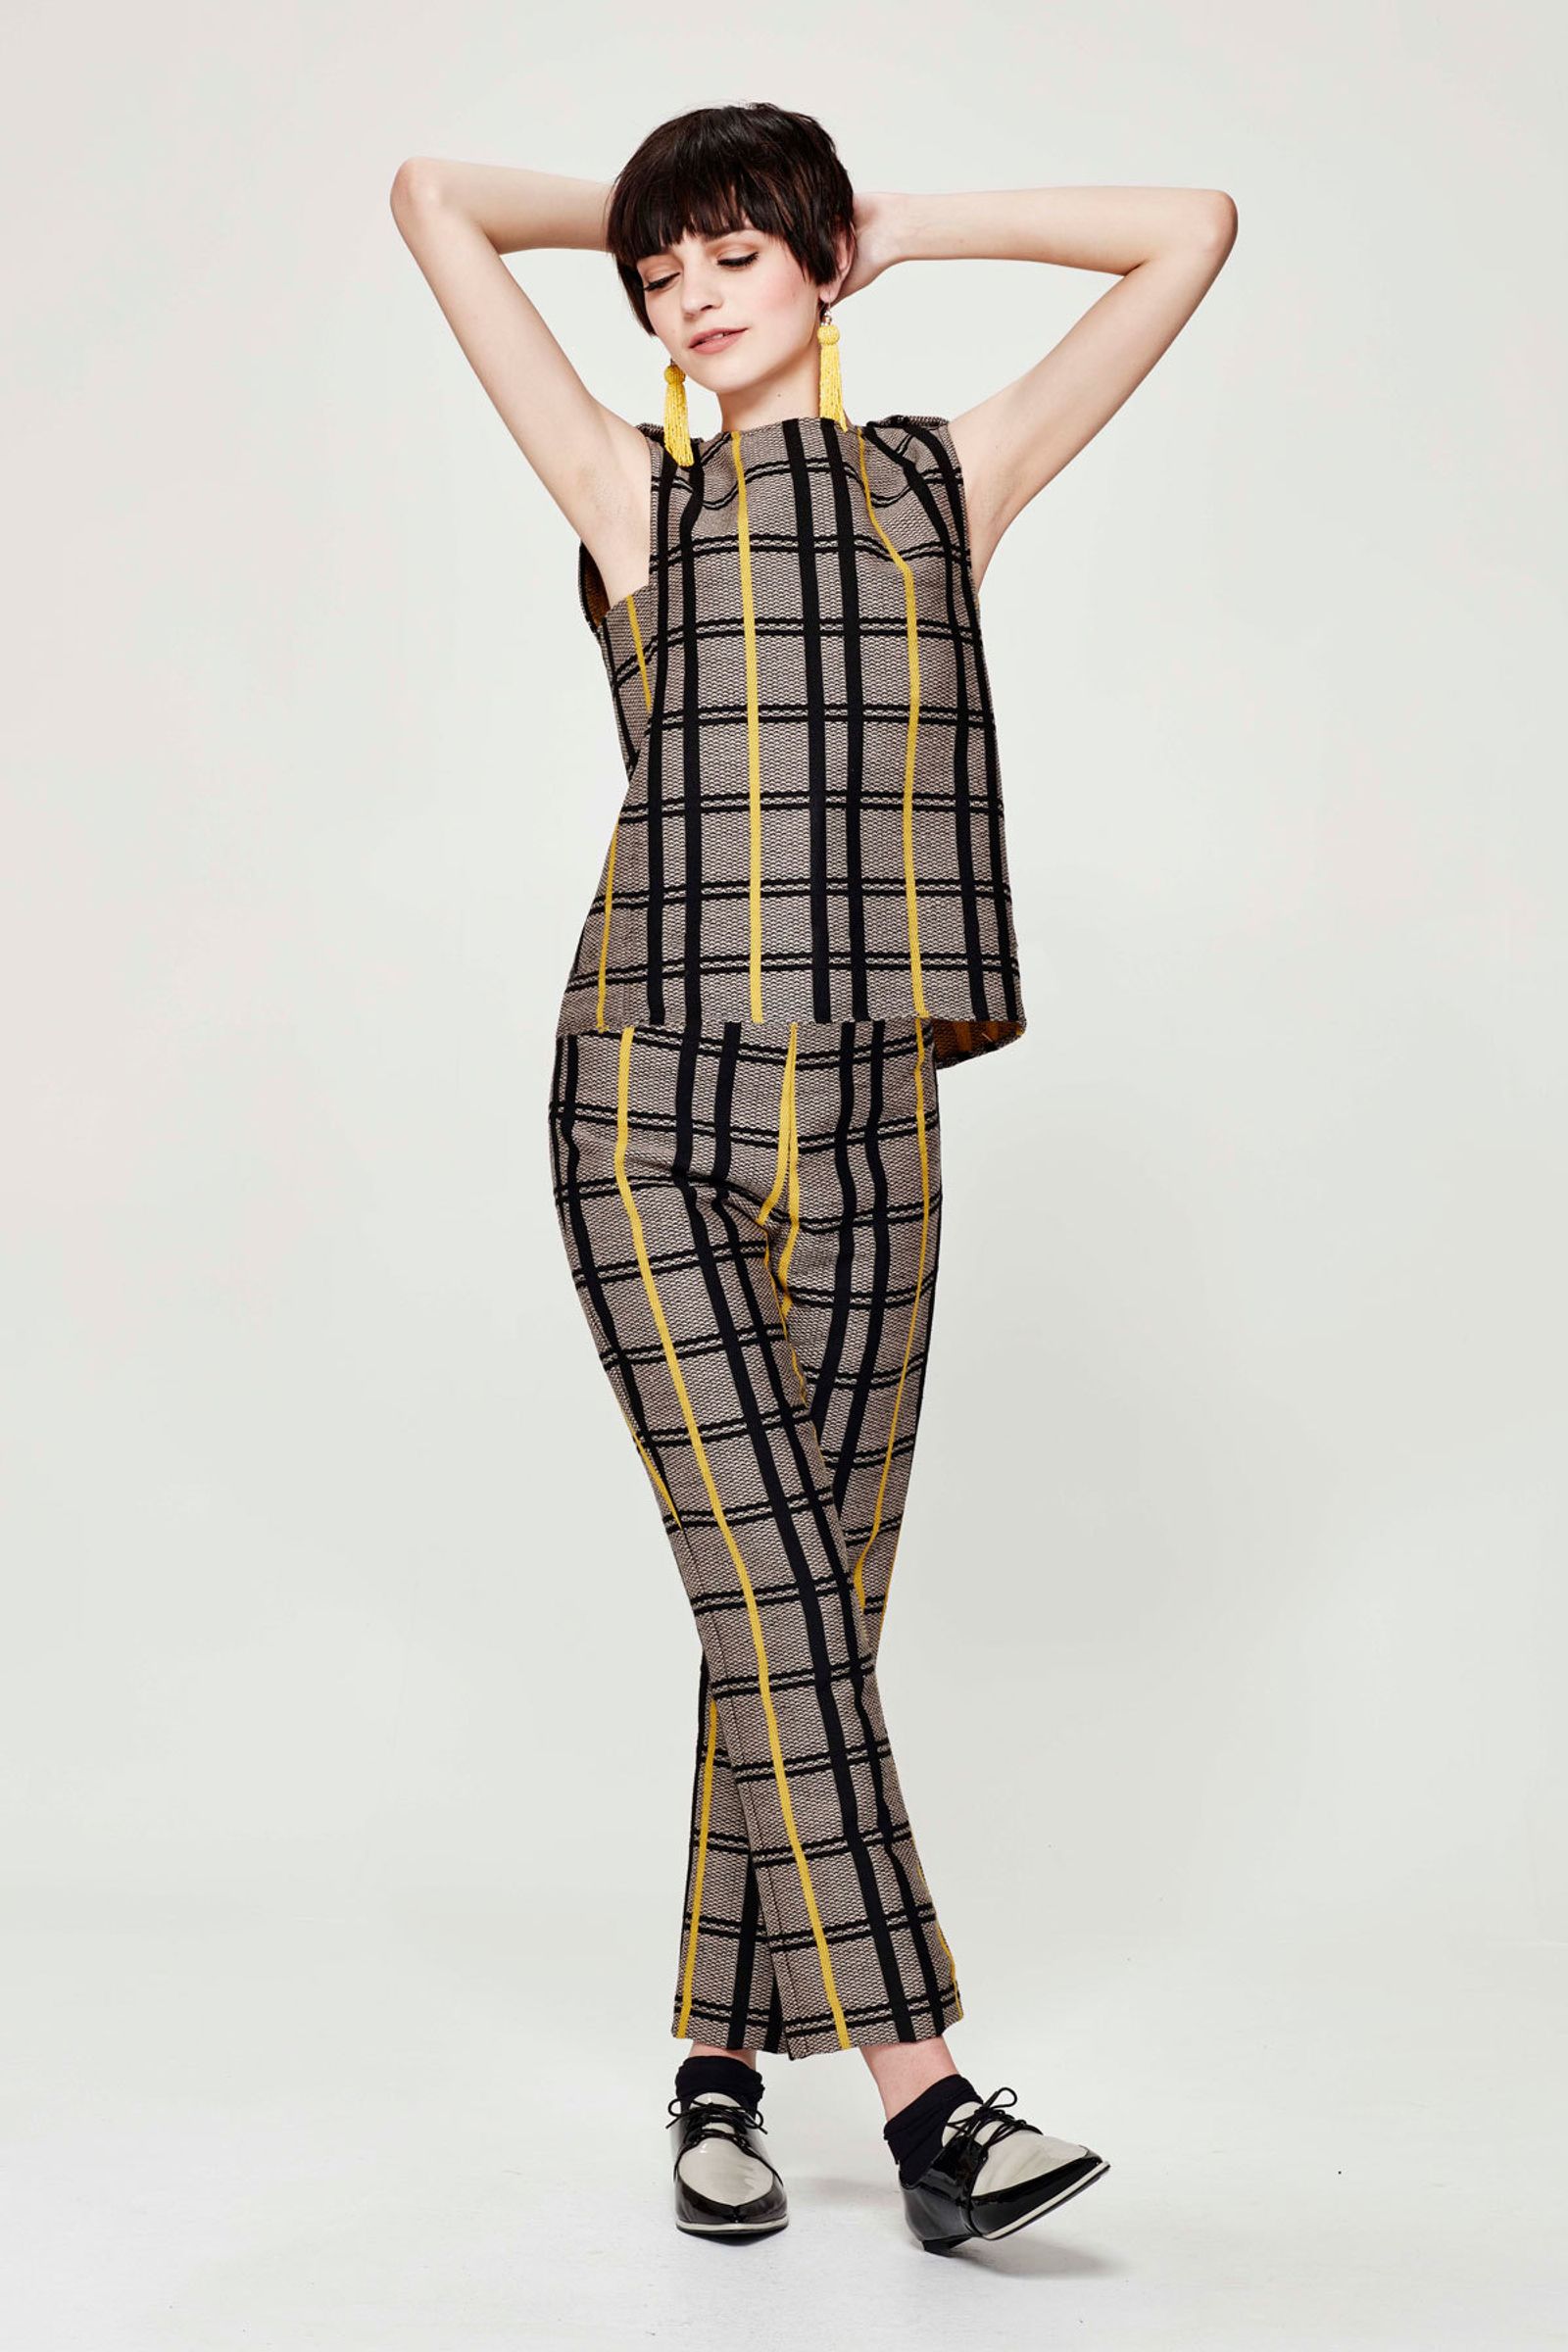 FOREVER PLAID 'TOP OF THE WORLD' TOP
								, 			FOREVER PLAID 'WALK TO ME' PANT